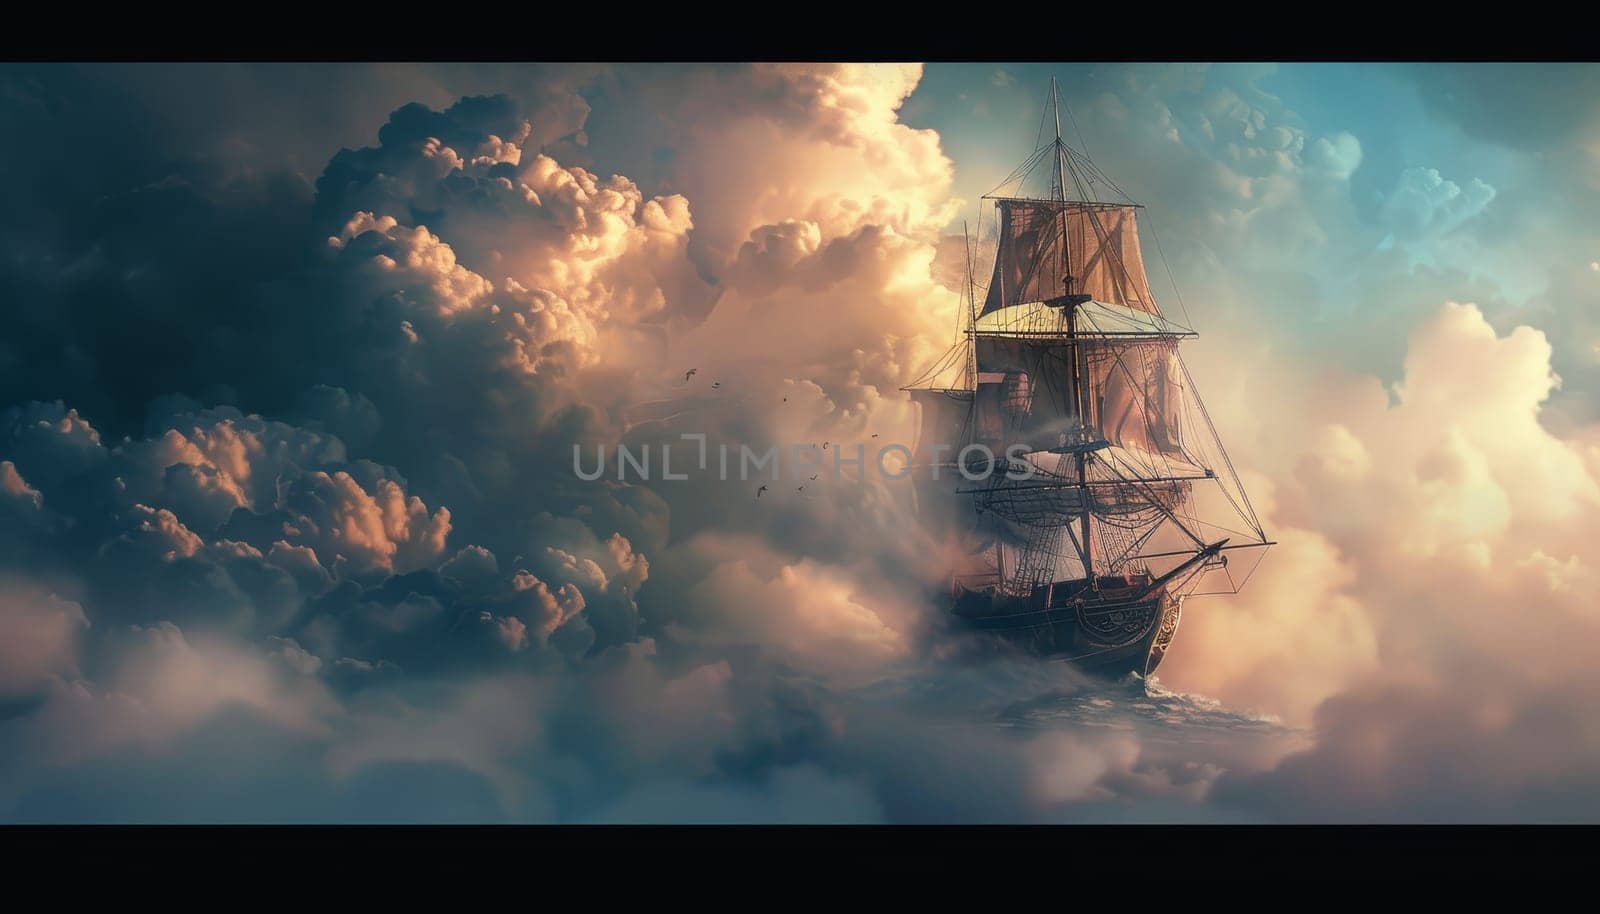 A large ship sails through a stormy sky by AI generated image.